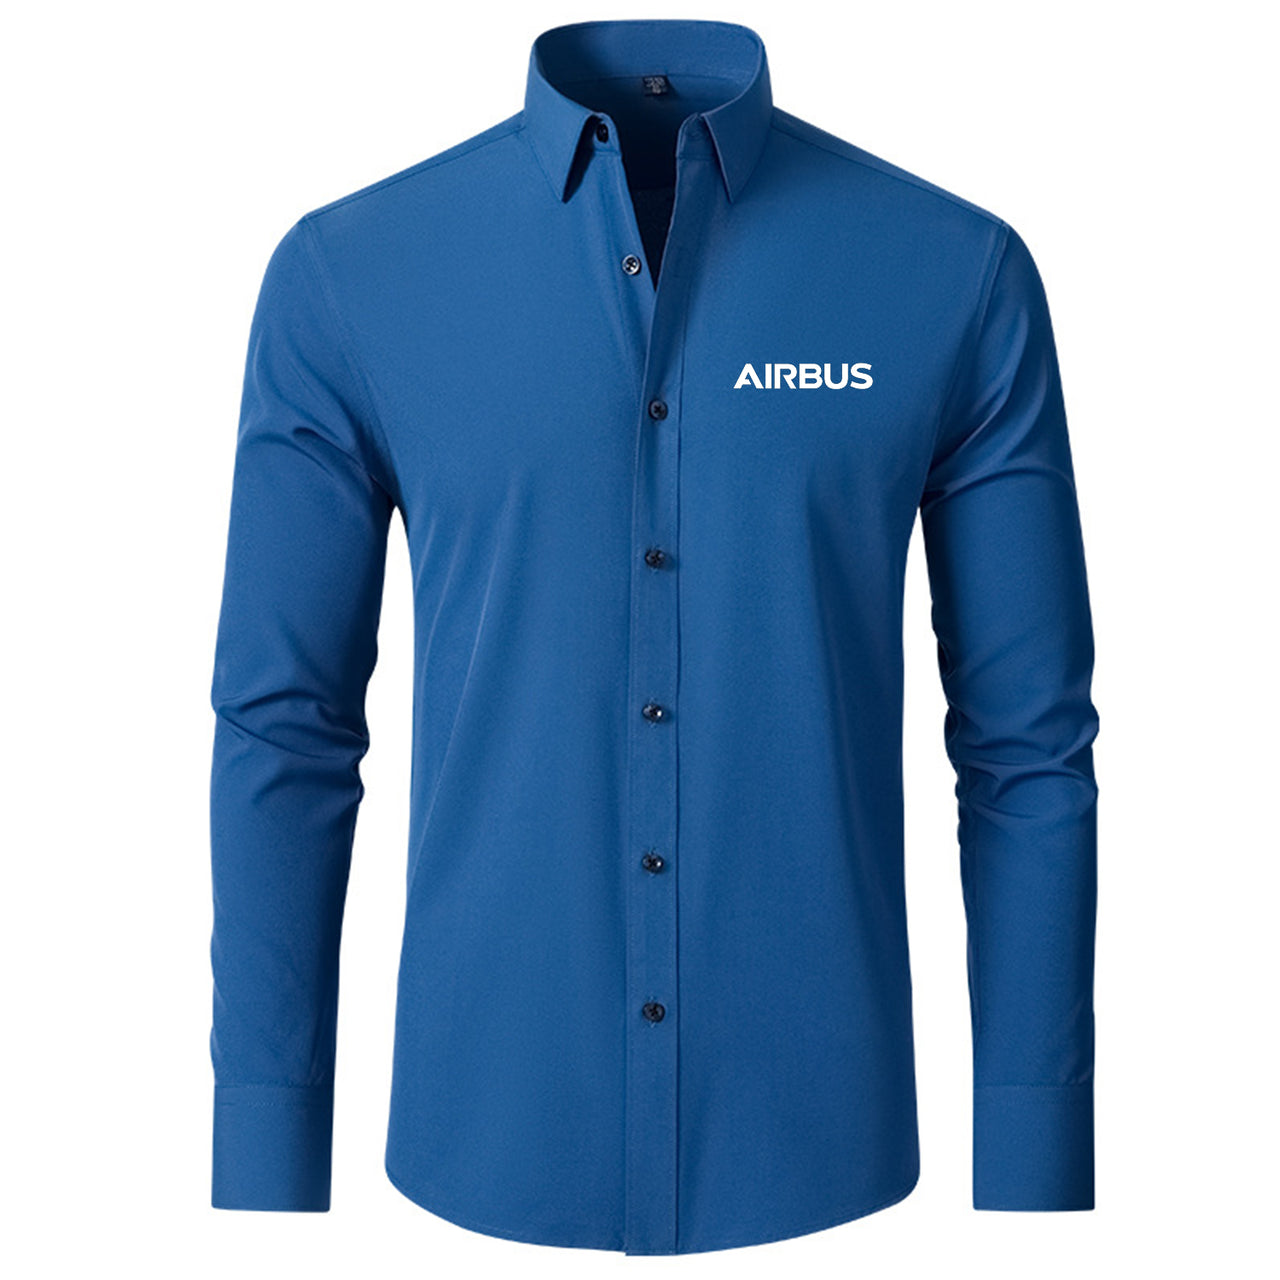 Airbus & Text Designed Long Sleeve Shirts